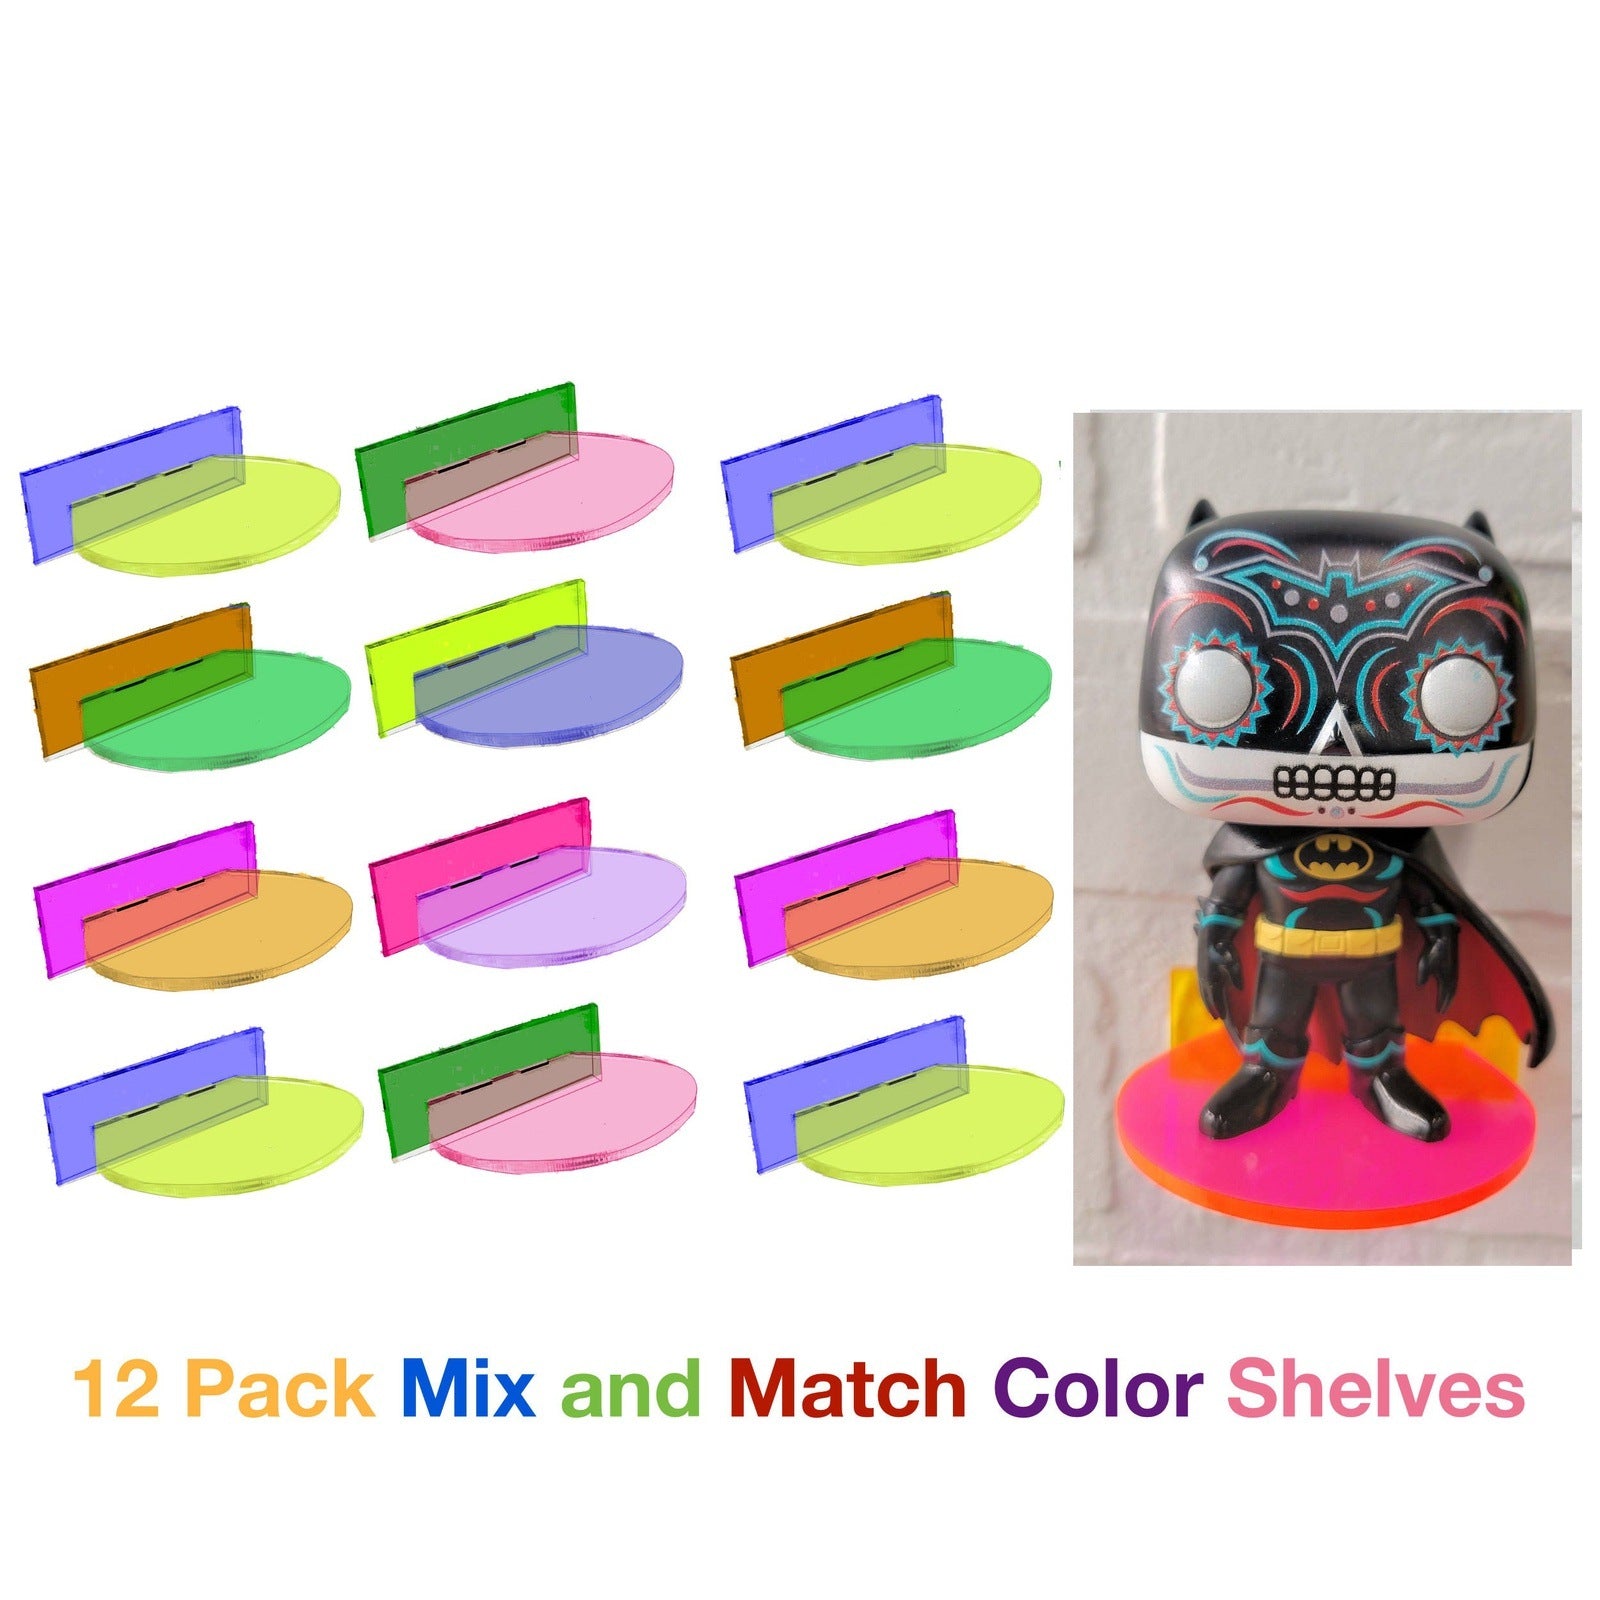 Funko Pop Vinyl and Funko Pin: Acrylic Wall Stand, Stick On, Single Shelf Neon Colors Mix and Match